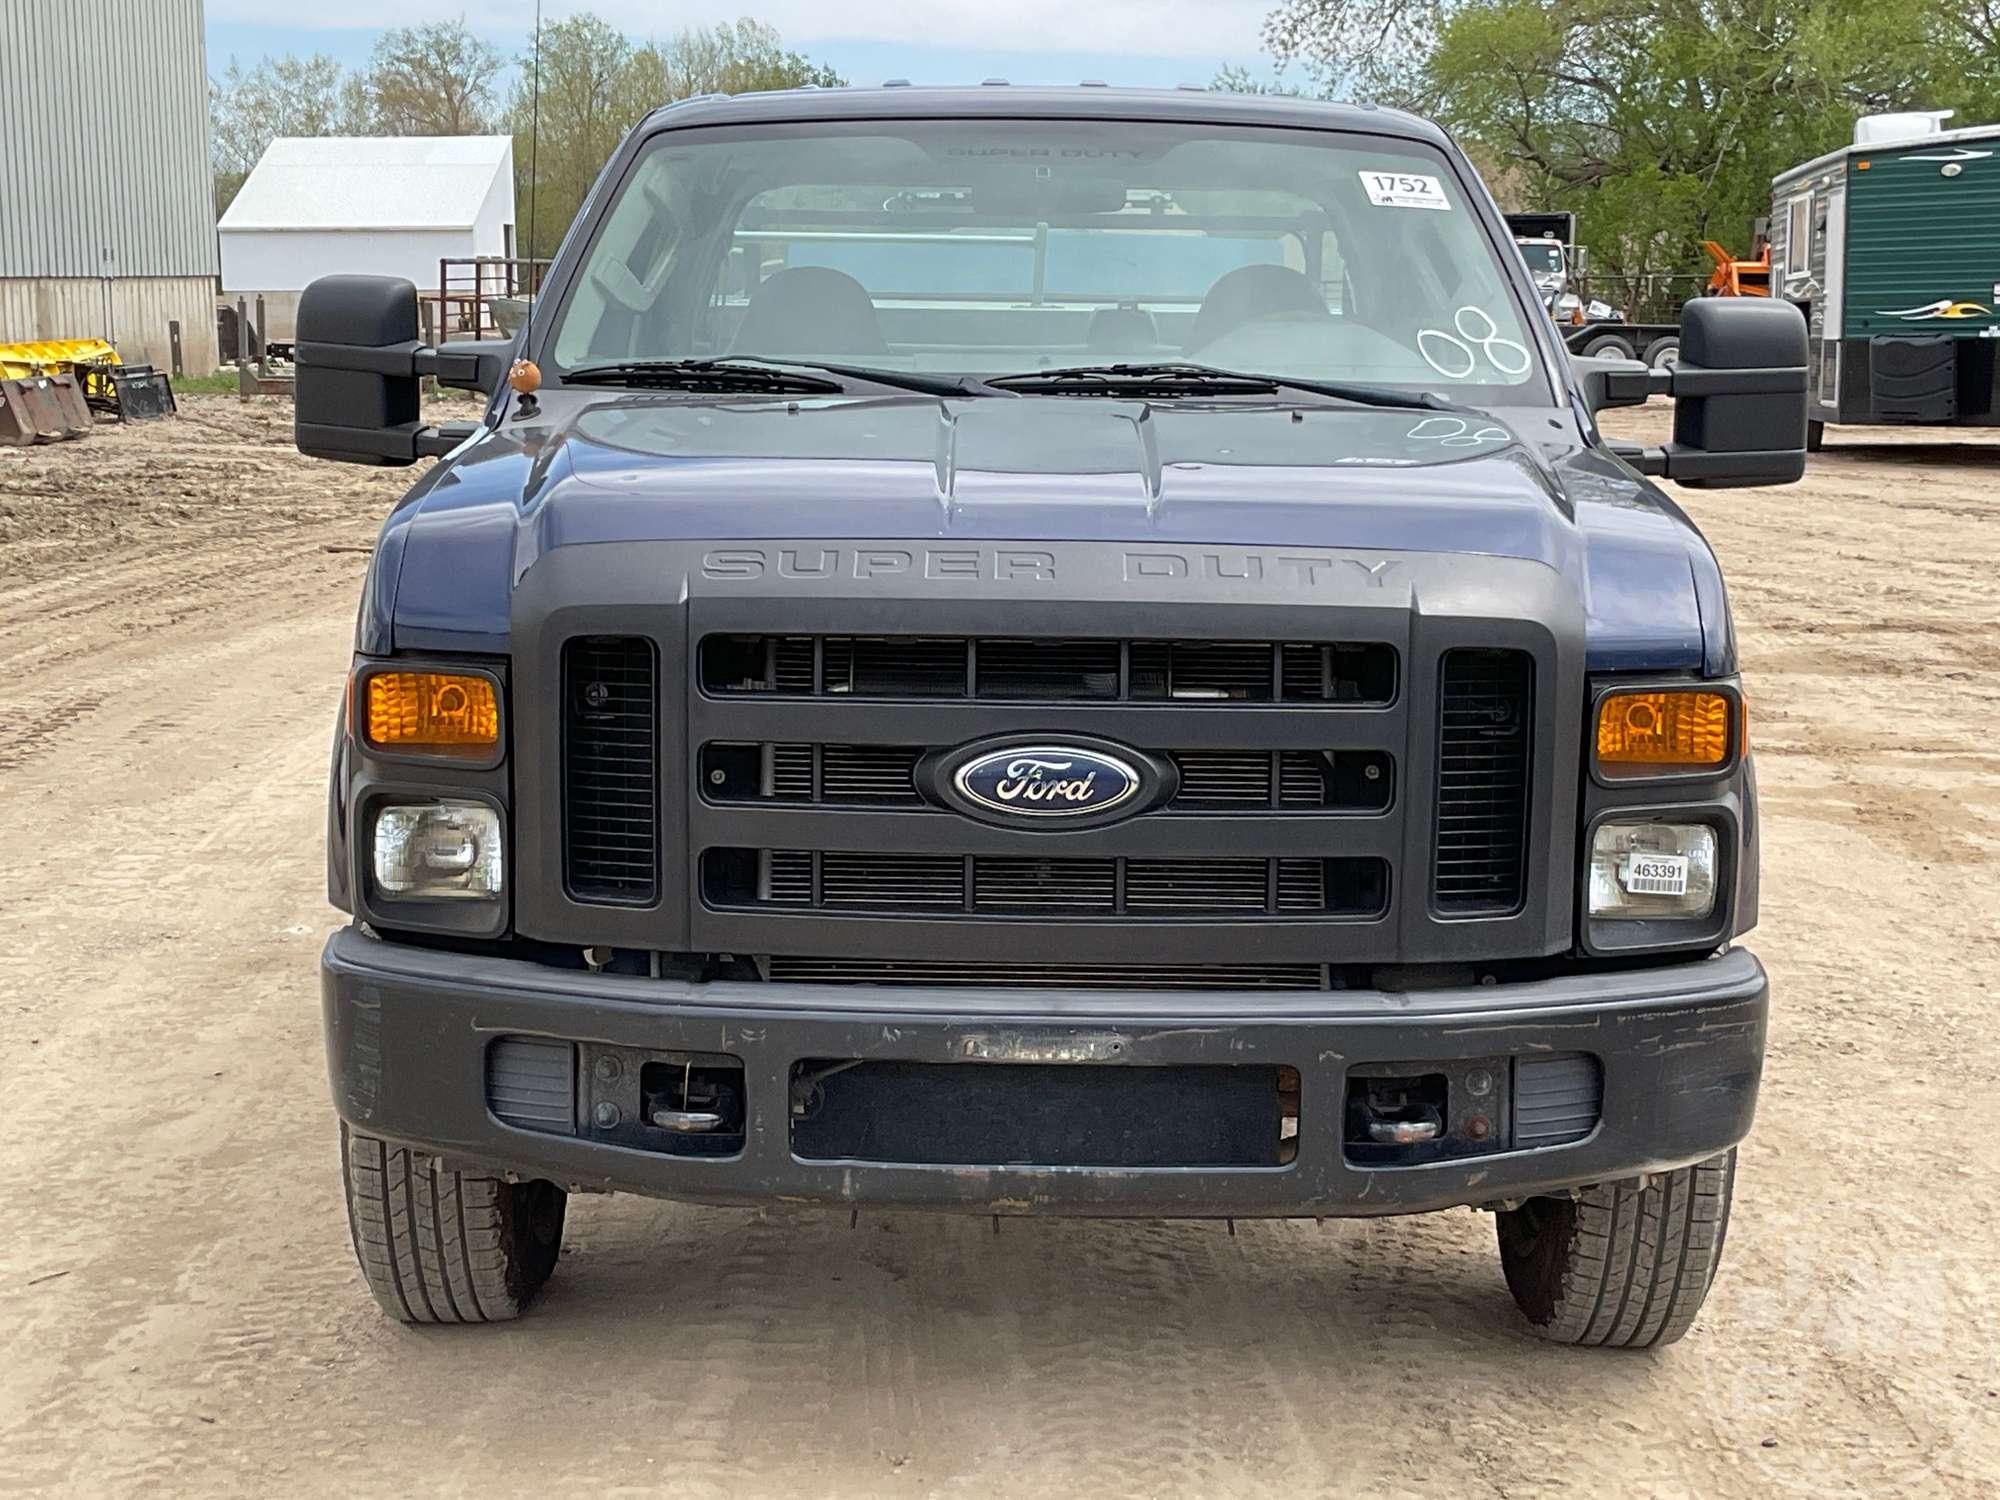 2008 FORD F-250 S/A UTILITY TRUCK VIN: 1FTSW20548ED28356